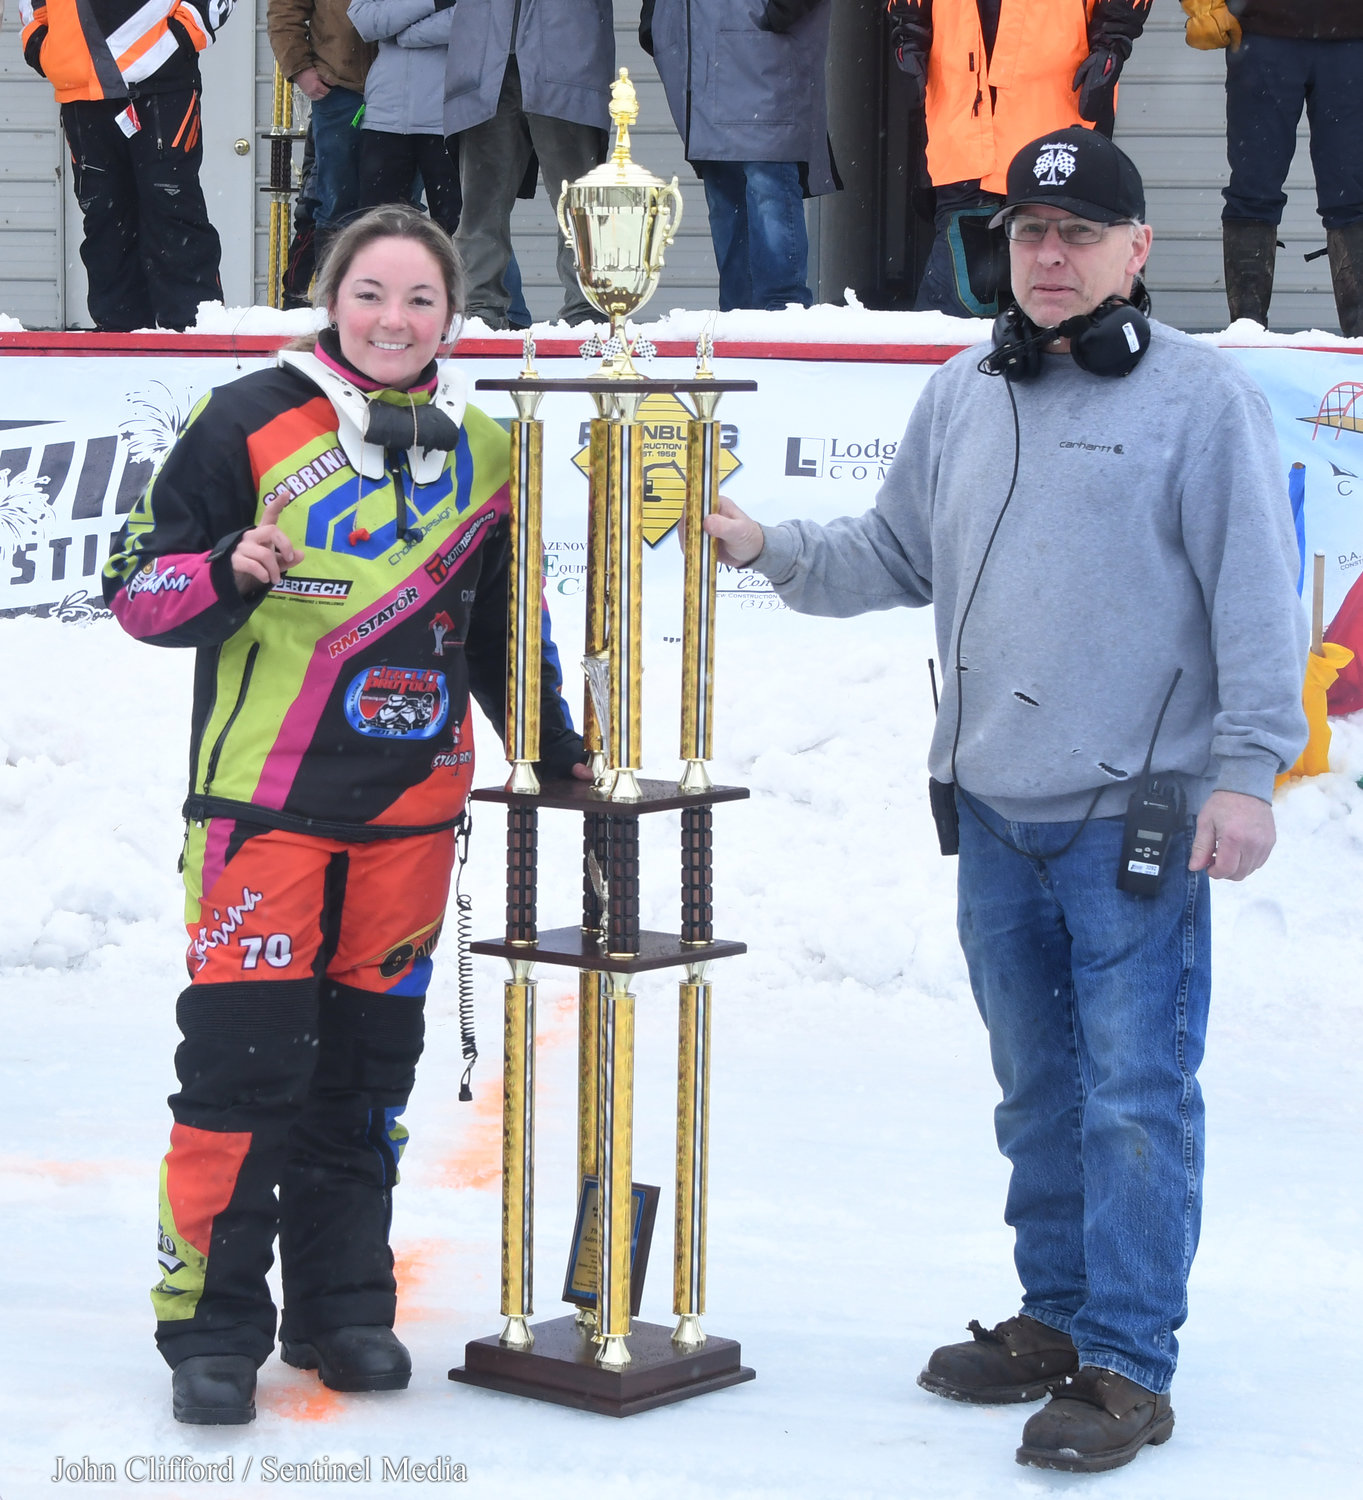 Sabrina Blanchet from Drummondville, Canada in victory lane after winning the 440 Super Modified Adirondack Cup with Snow Festtival race director Tony Petinelli Sunday afternoon at Boonville Fairgrounds.